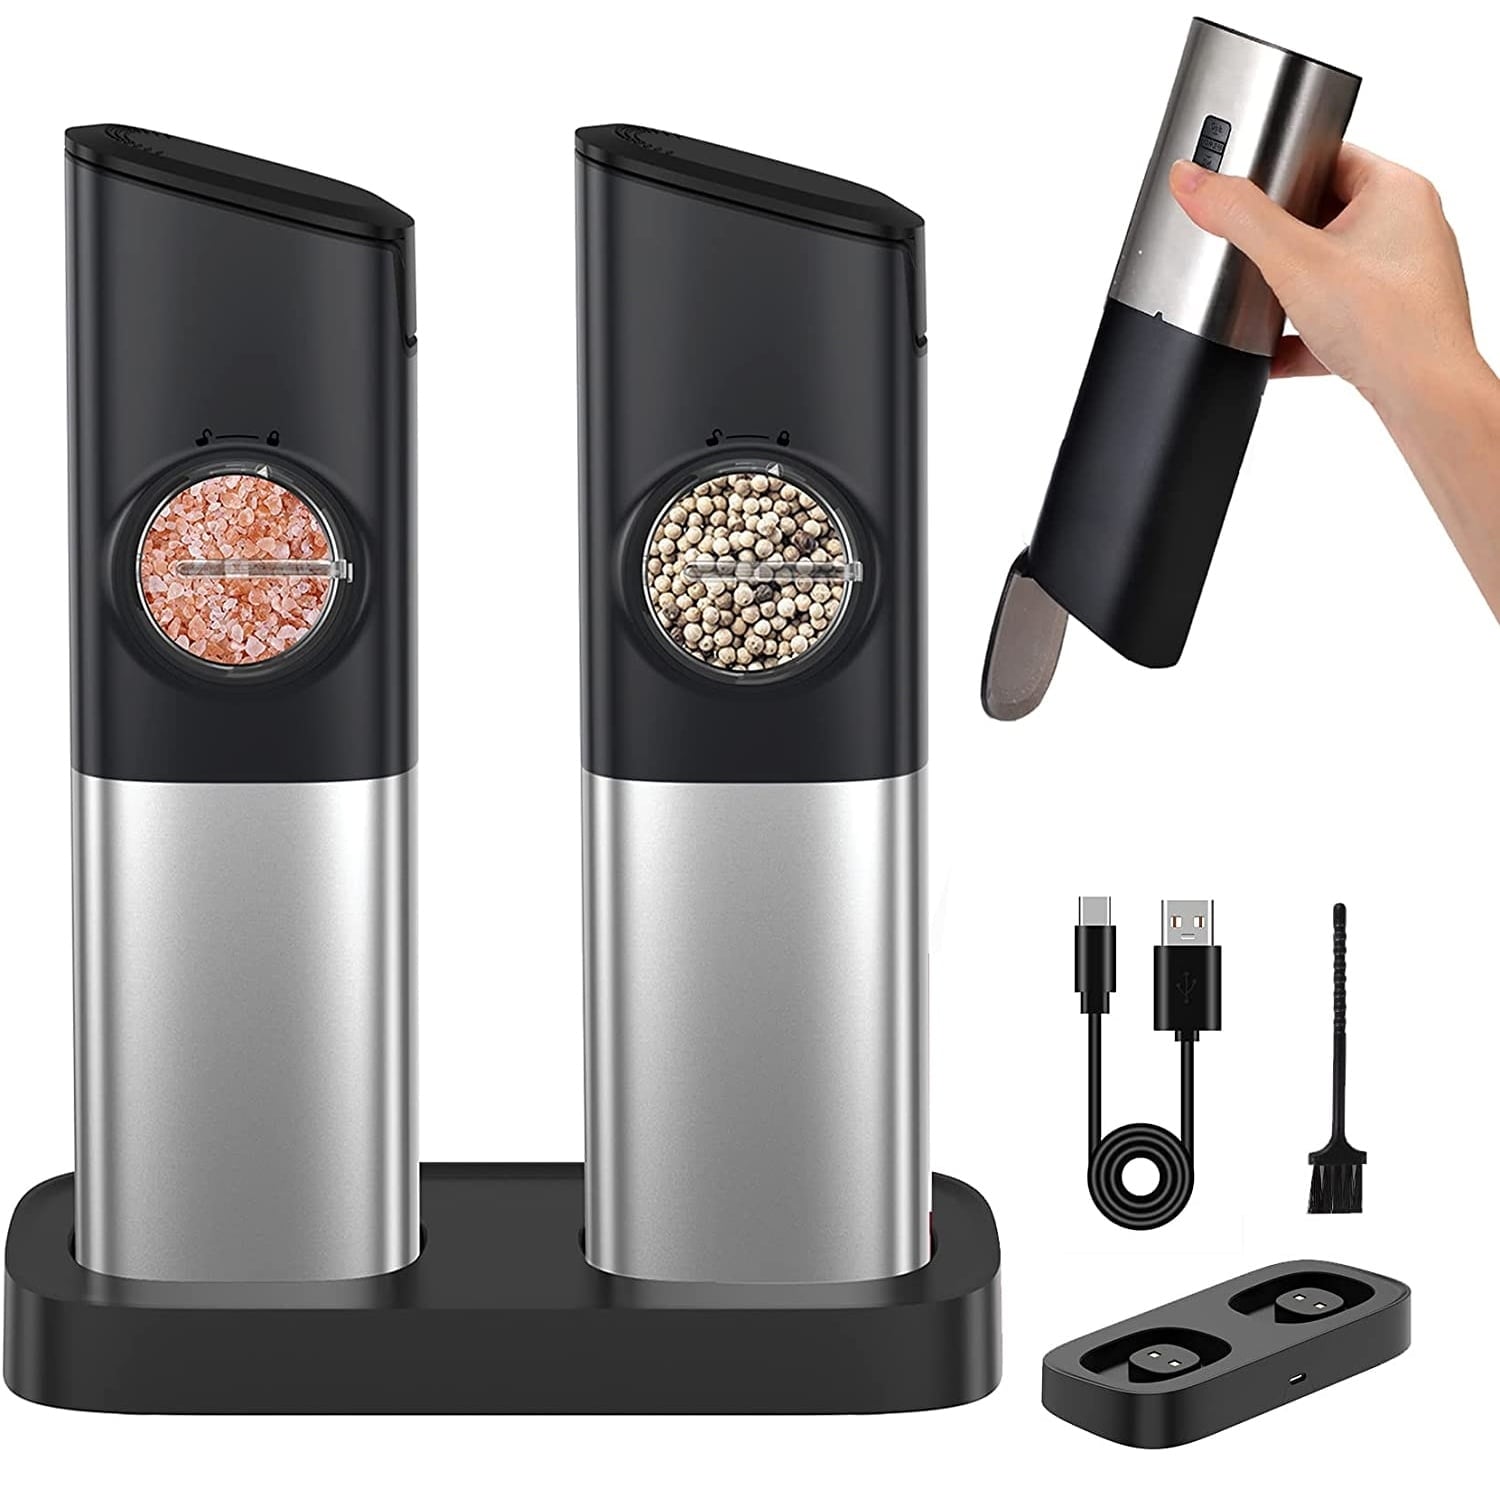 Electric Salt and Pepper Grinder Set - Matte Black Battery Operated Salt &  Pepper Mills with Light (Pack of 2) - Automatic One Handed Operation with  Adjustable Ceramic Grinders - Yahoo Shopping